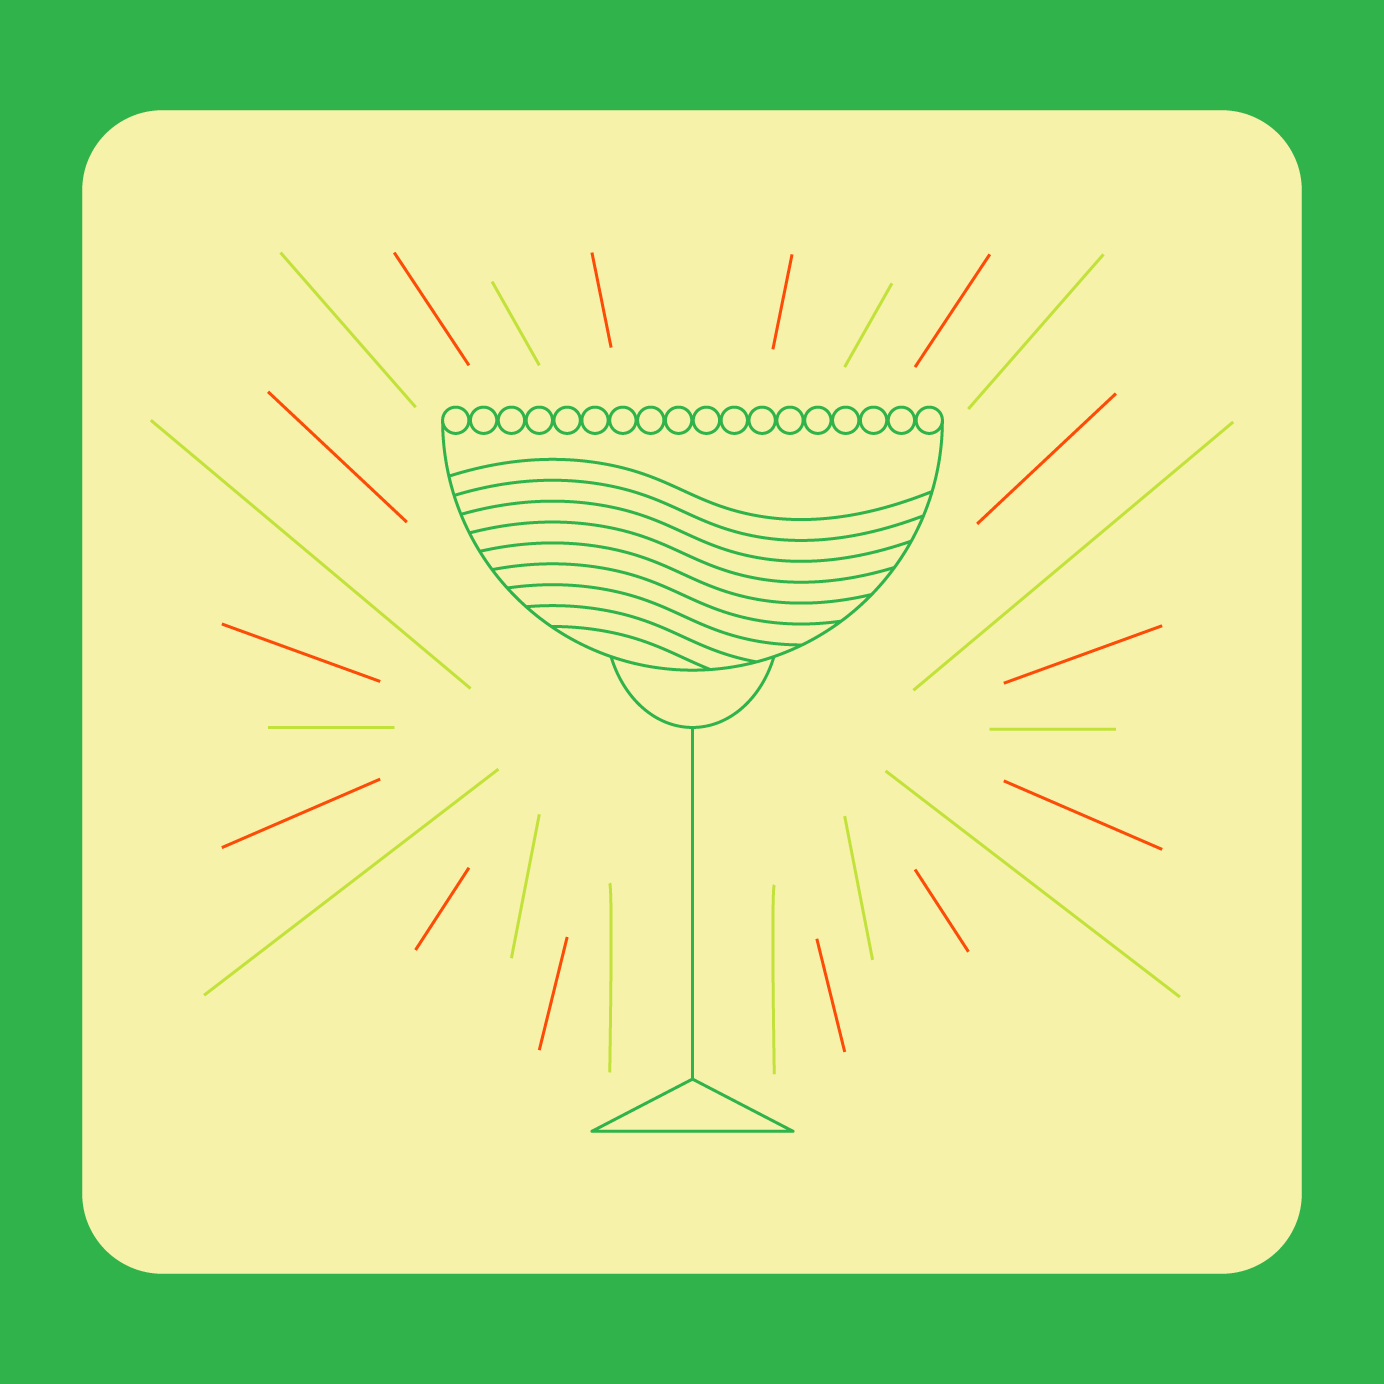 Best Practices: The Key to Mastering Margaritas Is Attention to Detail